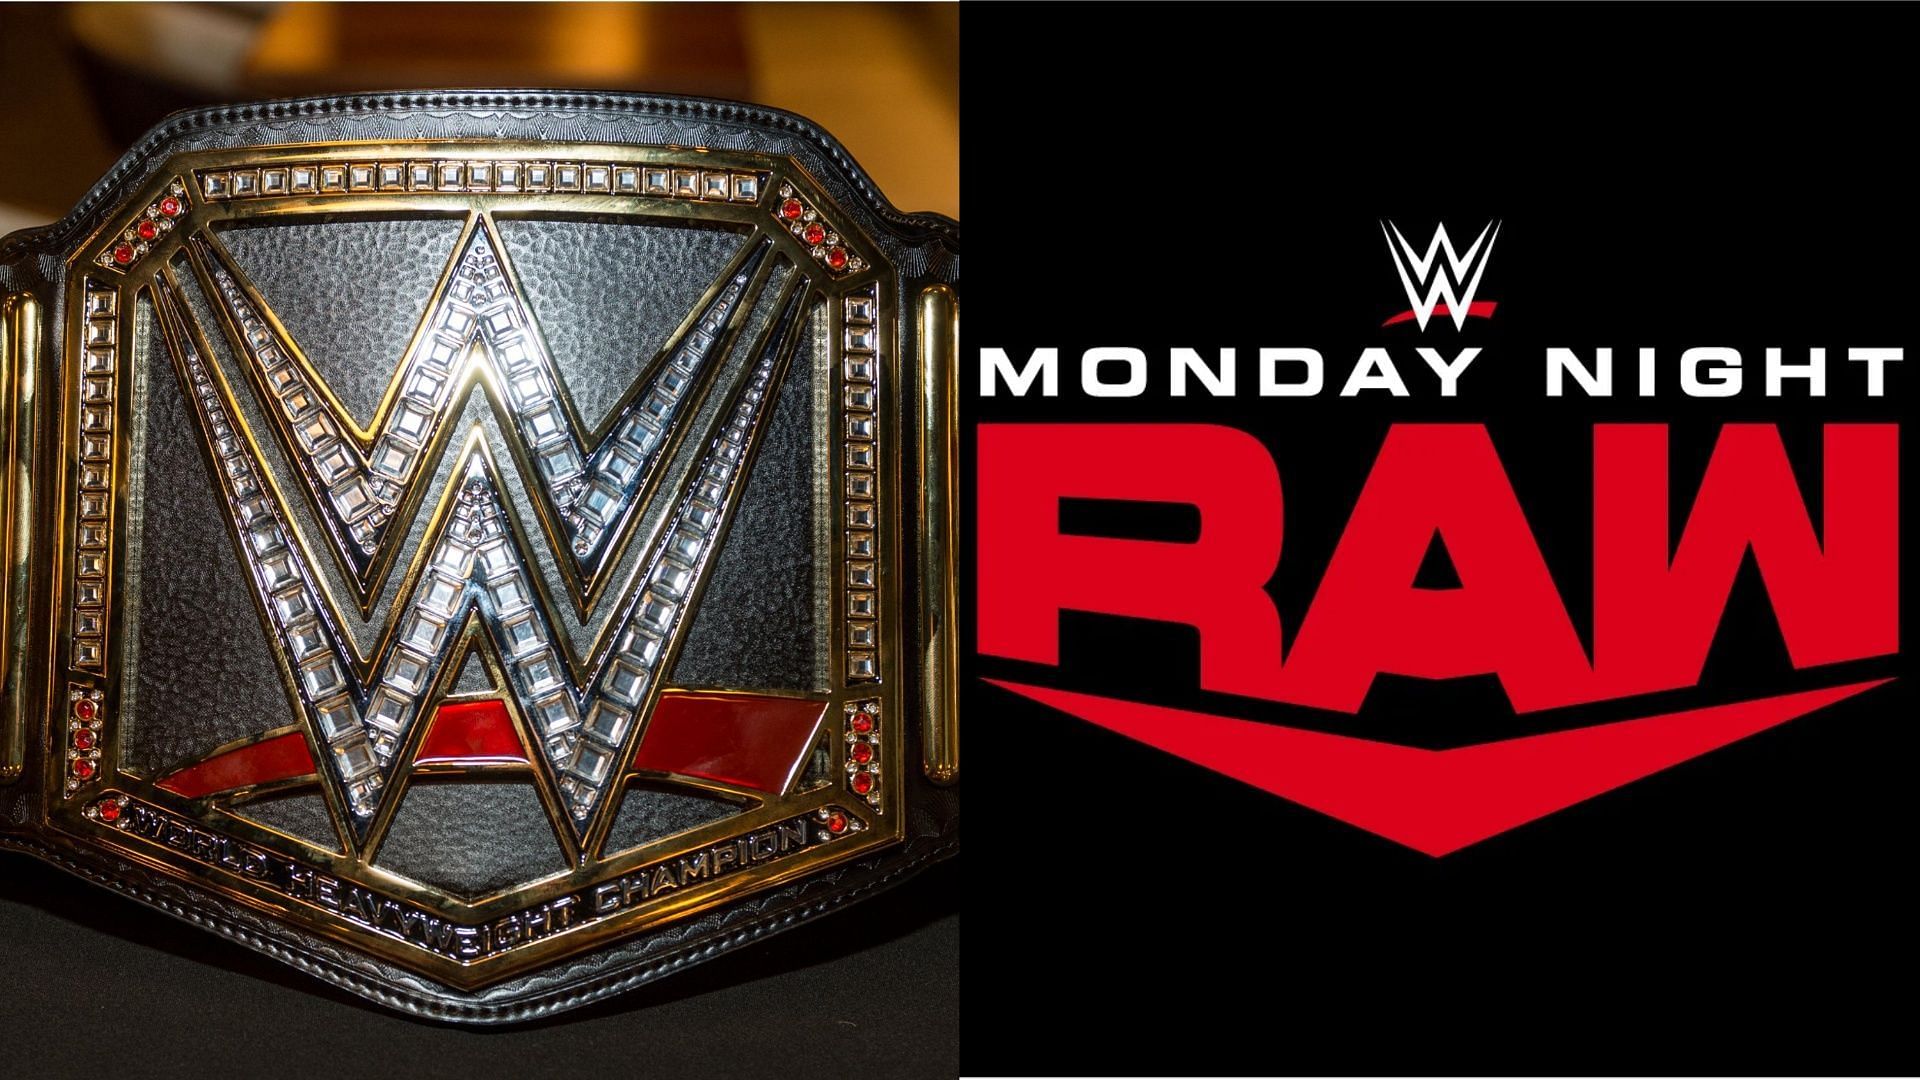 The WWE Championship was once exclusive to Monday Night RAW.